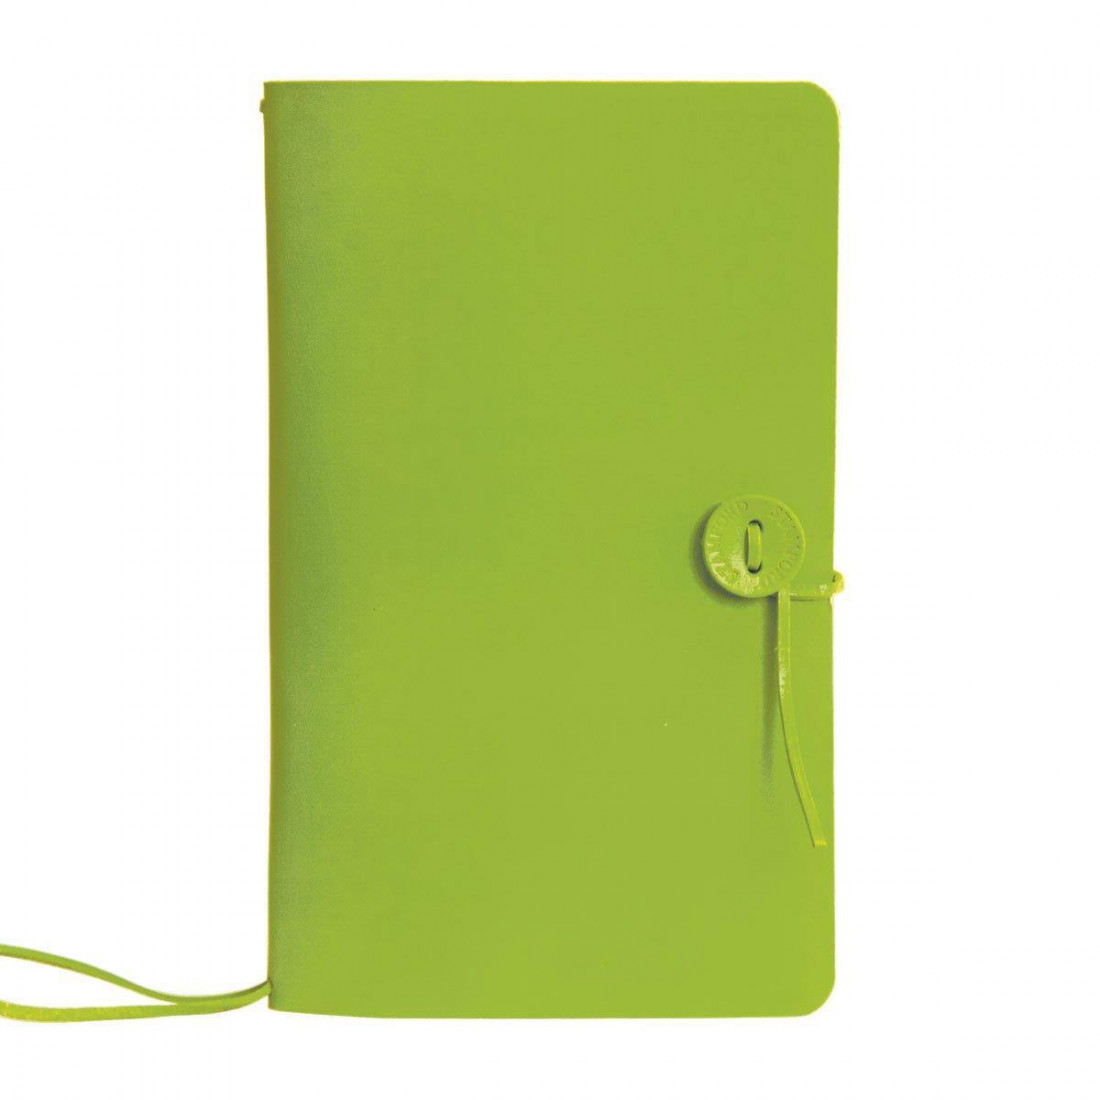 The Travellers Journal Bright Range, Bright Green, Large (18x25,5) Stamford